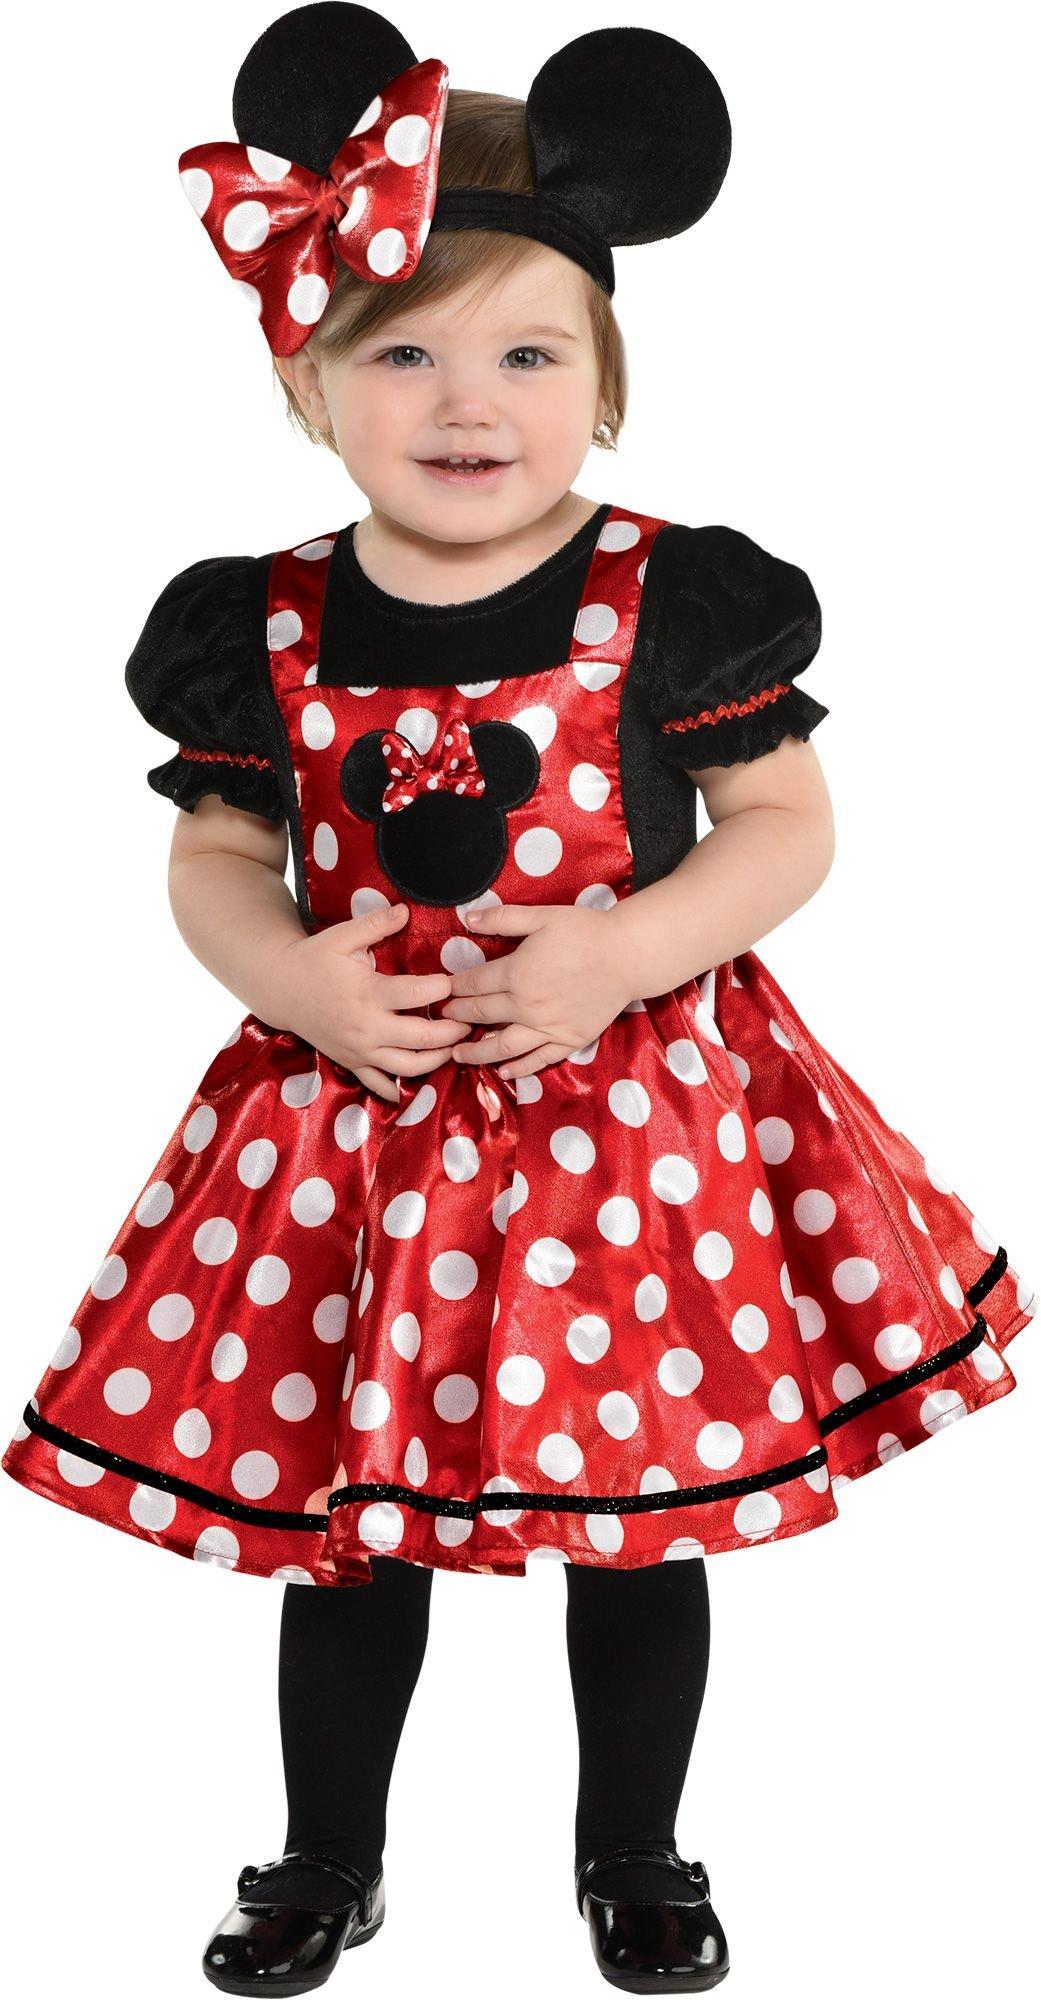 Girls Carnival Outfits Ideas-15 Outfits To Wear At Carnival | Minnie Dress  Girls Carnival Birthday Party Costume 